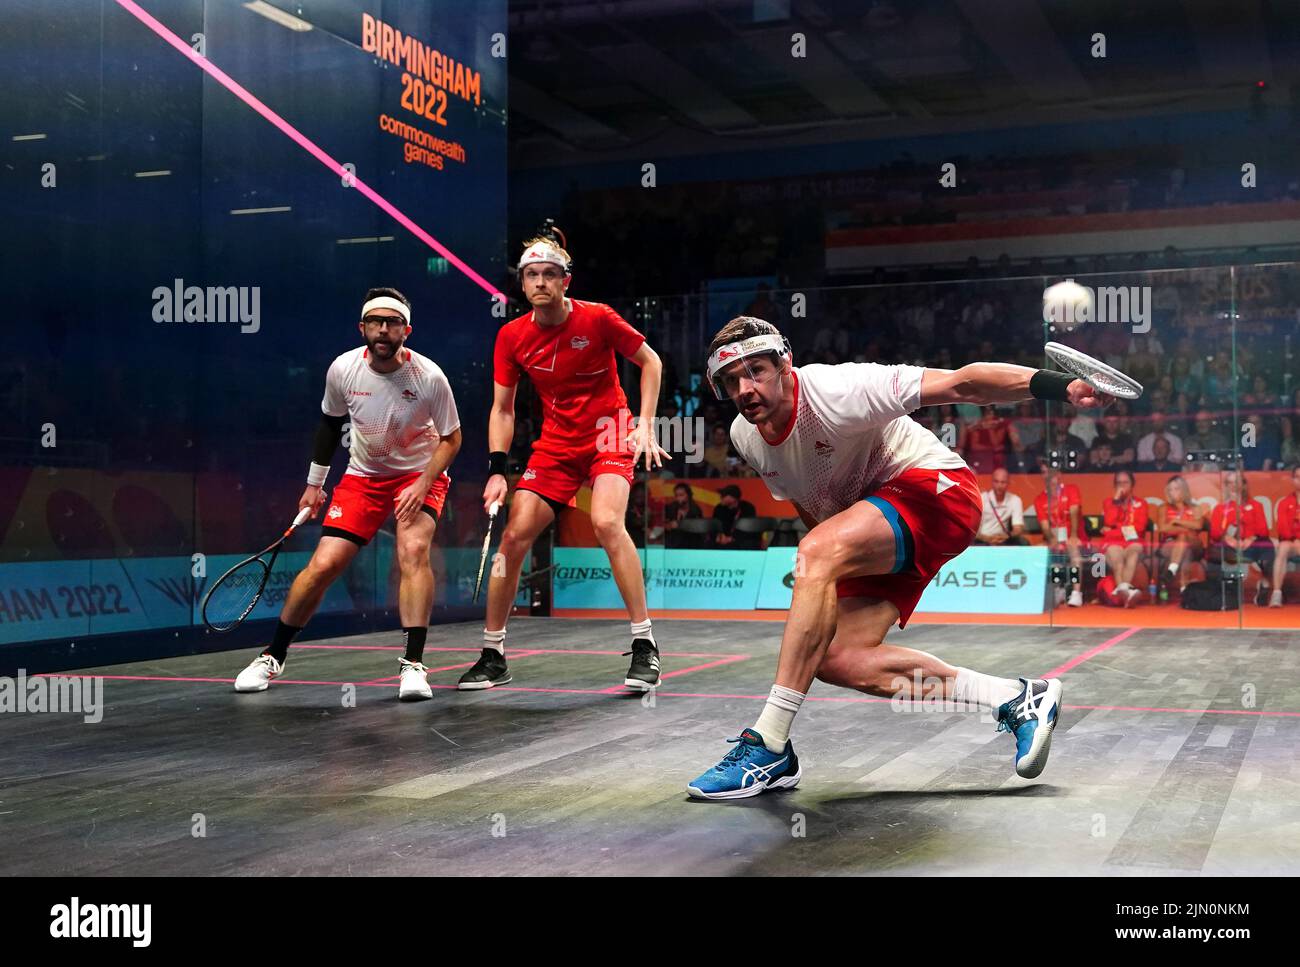 England's Adrian Waller in action with Daryl Selby in the Men's Squash Doubles Gold medal match against England's James Willstrop and Declan James at the University of Birmingham Hockey and Squash Centre on day eleven of the 2022 Commonwealth Games in Birmingham. Picture date: Monday August 8, 2022. Stock Photo